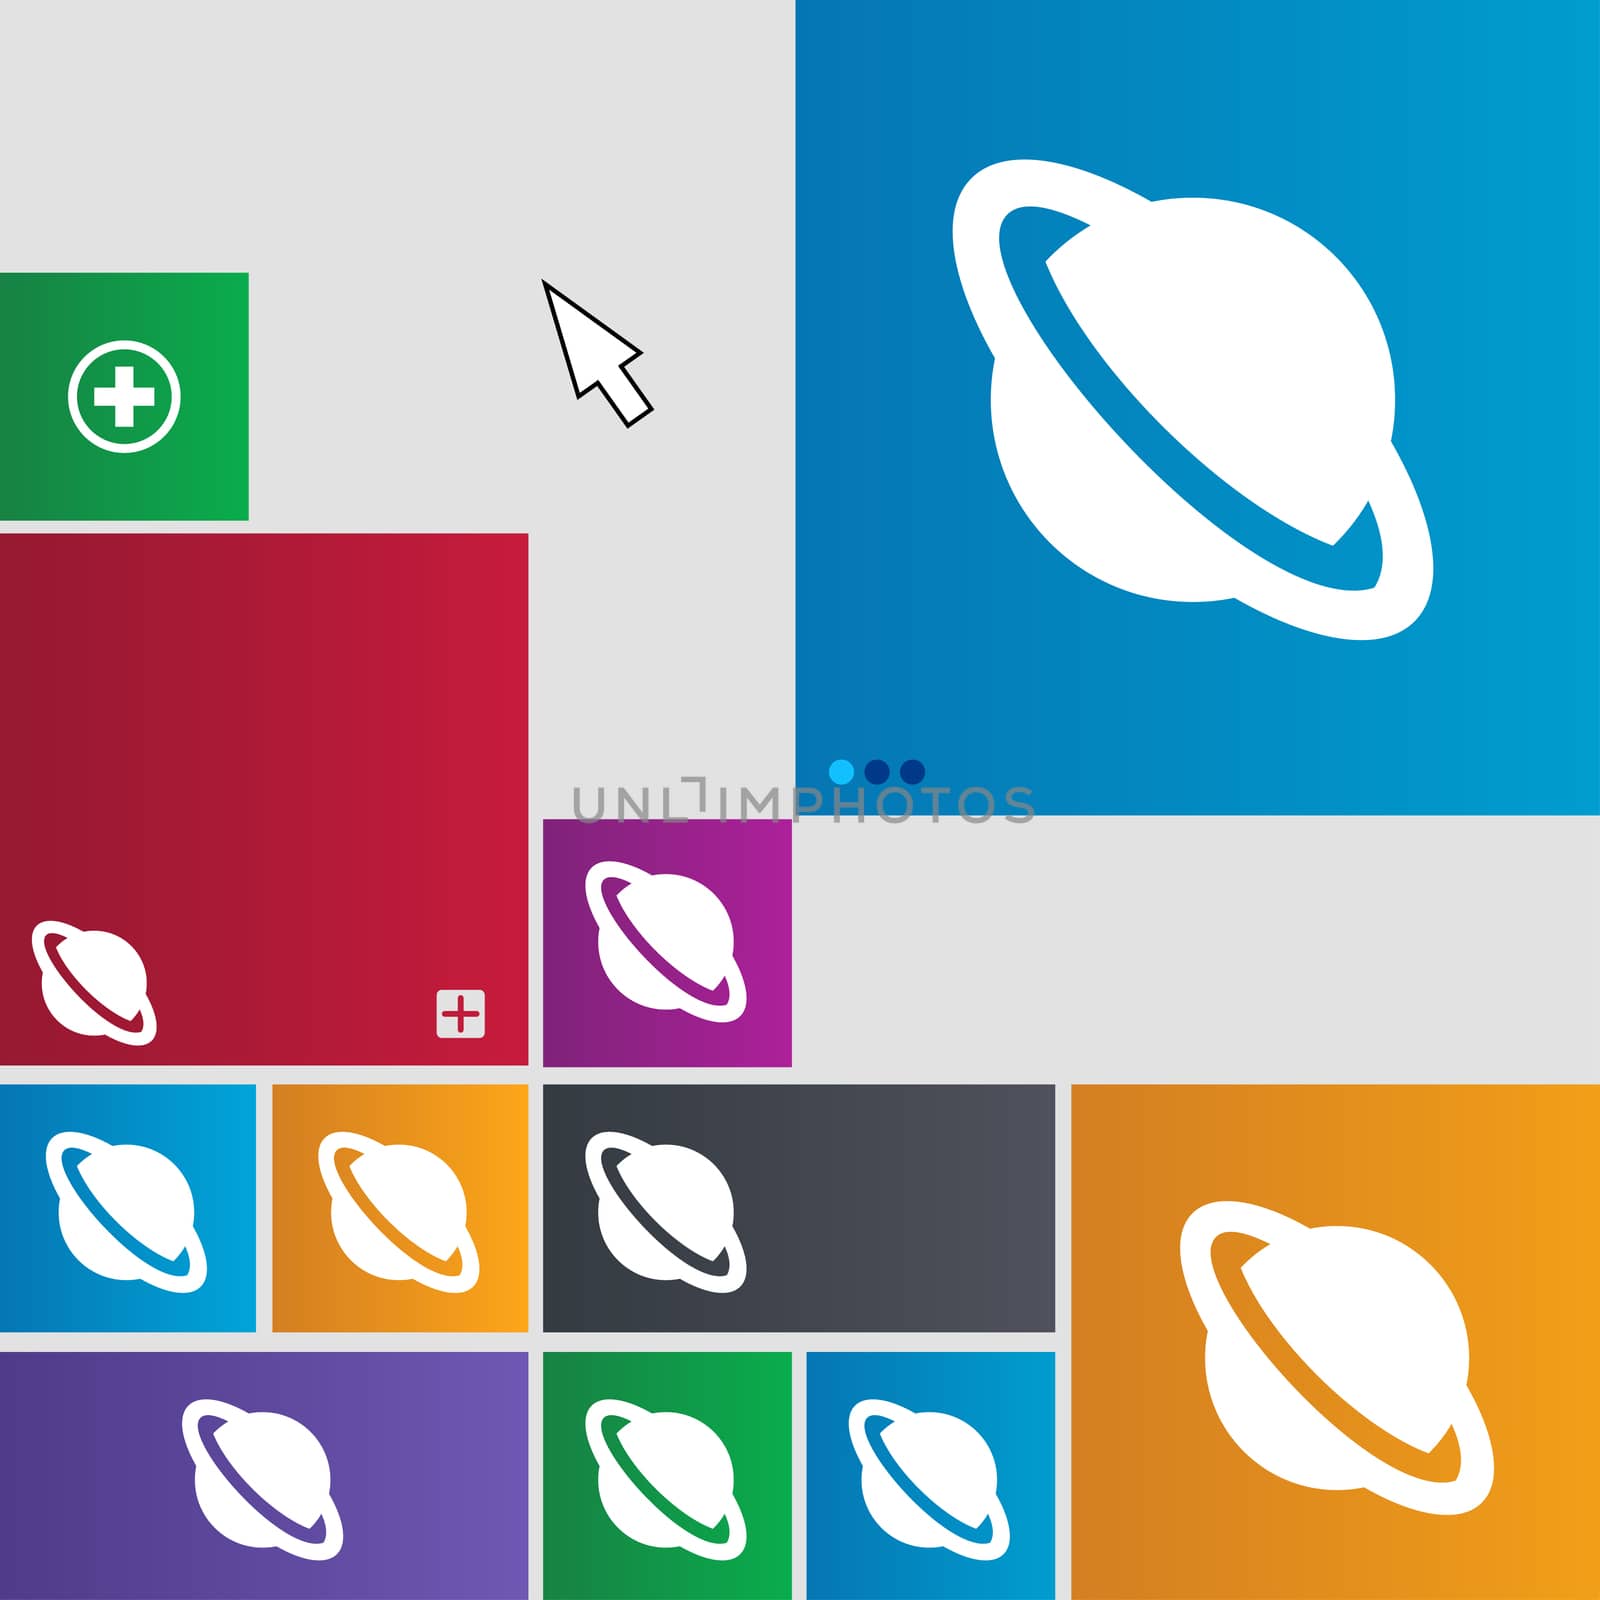 Jupiter planet icon sign. buttons. Modern interface website buttons with cursor pointer. illustration